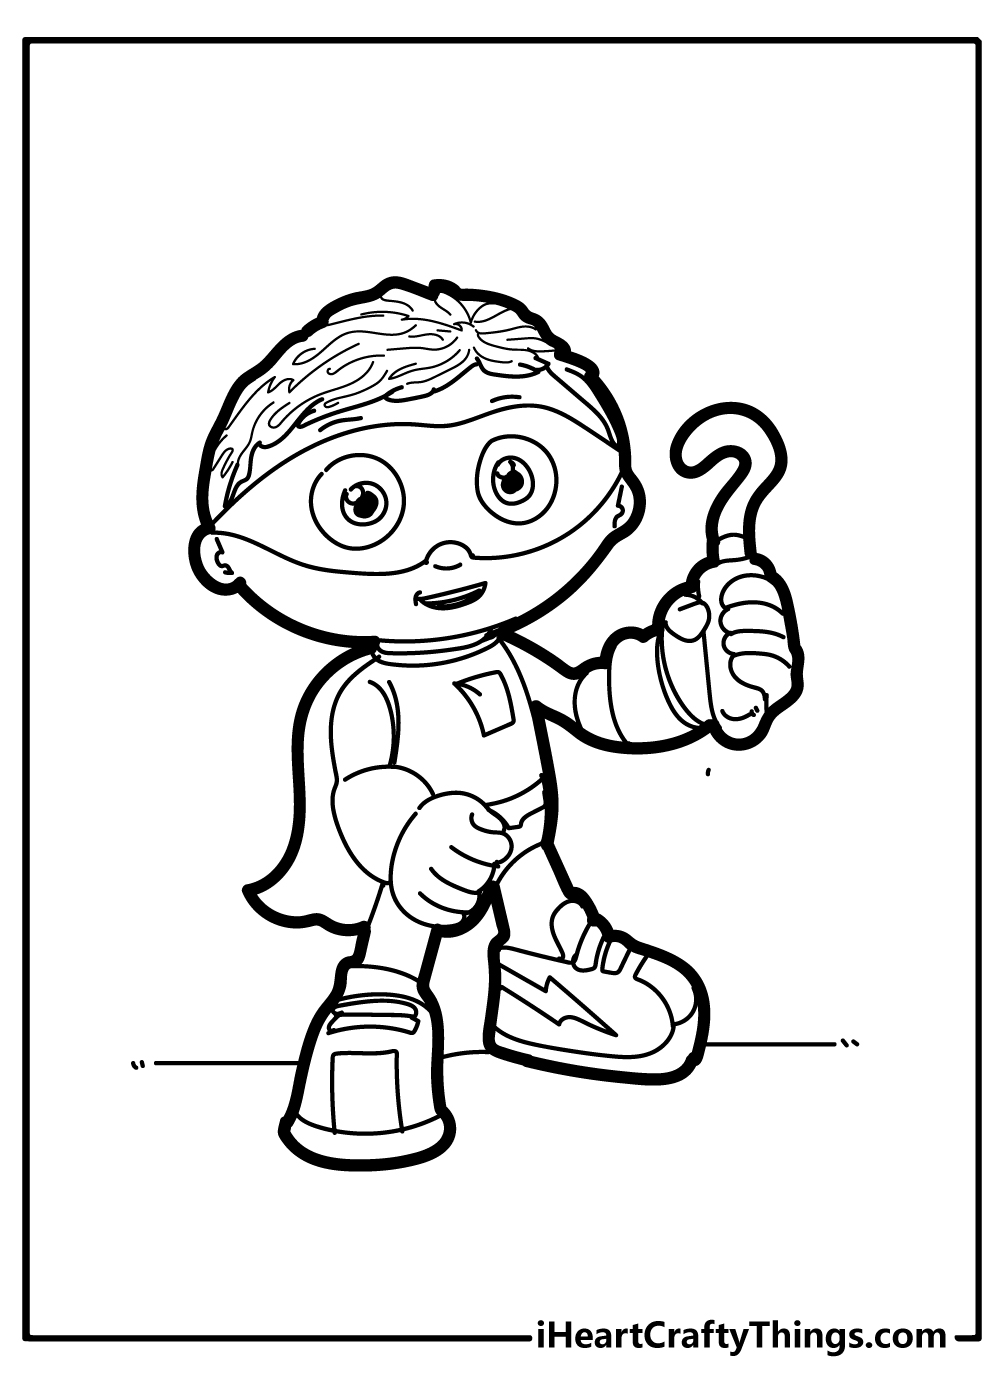 Super Coloring Pages for preschoolers free printable